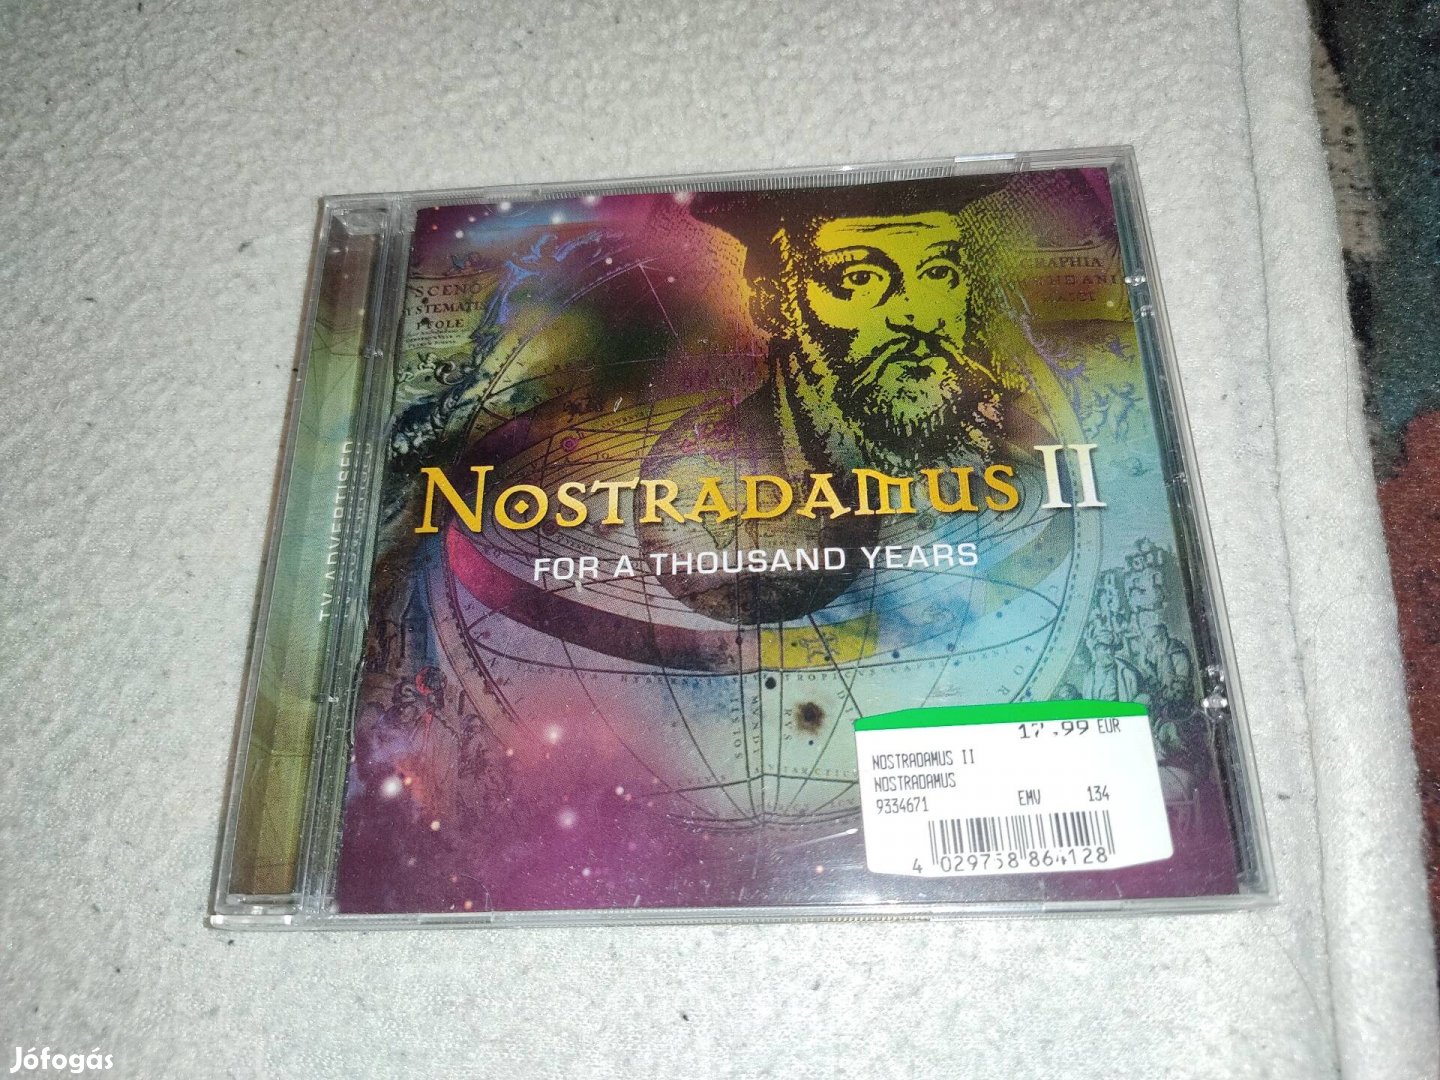 Nostradamus - II CD For A Thousand Years CD 